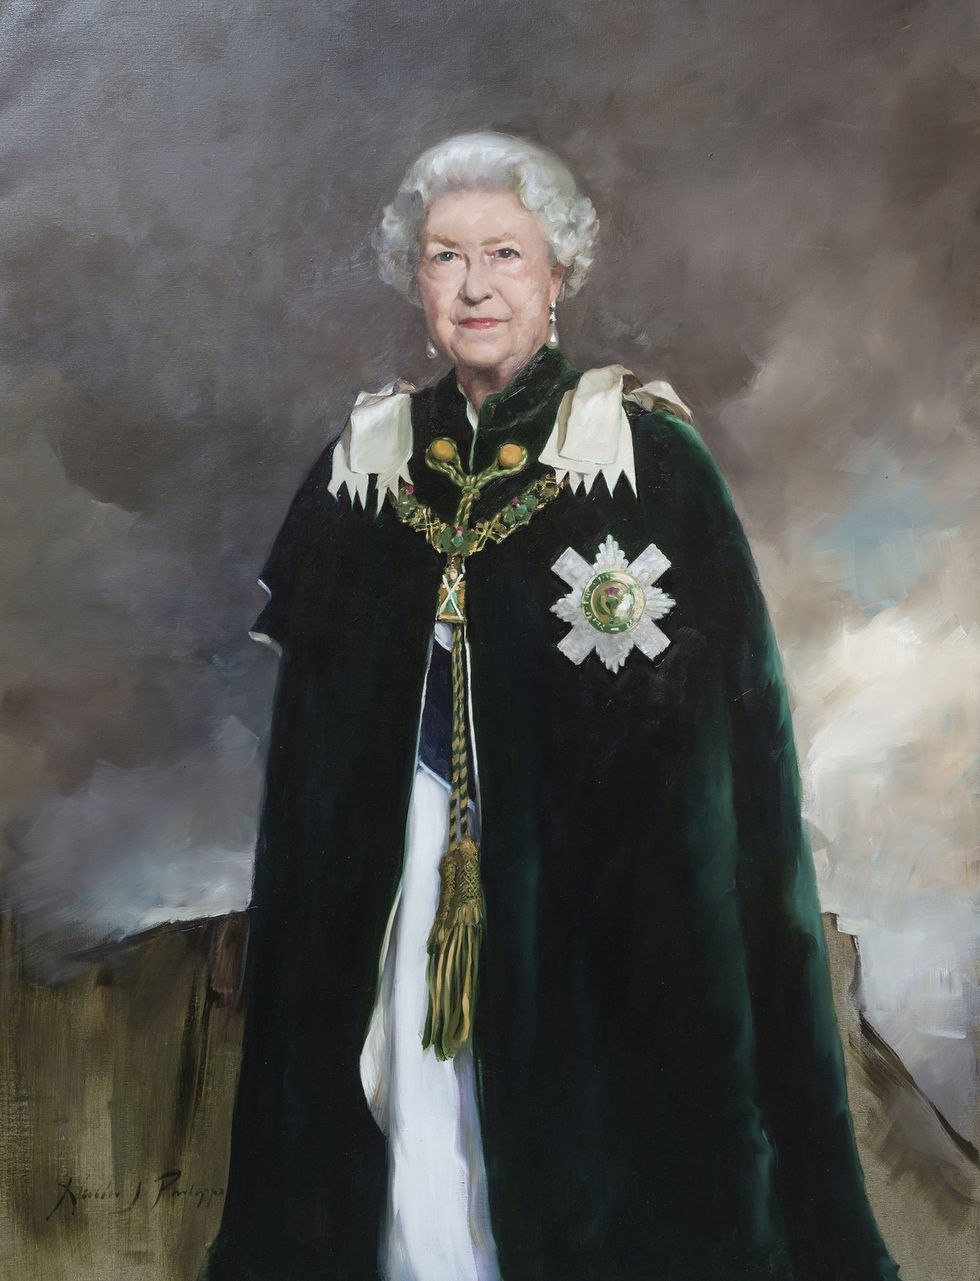 The Queen painted in official Order of the Thistle garb by Nicky Philipps. Currently on display at the Palace of Holyrood in Edinburgh, Scotland. 